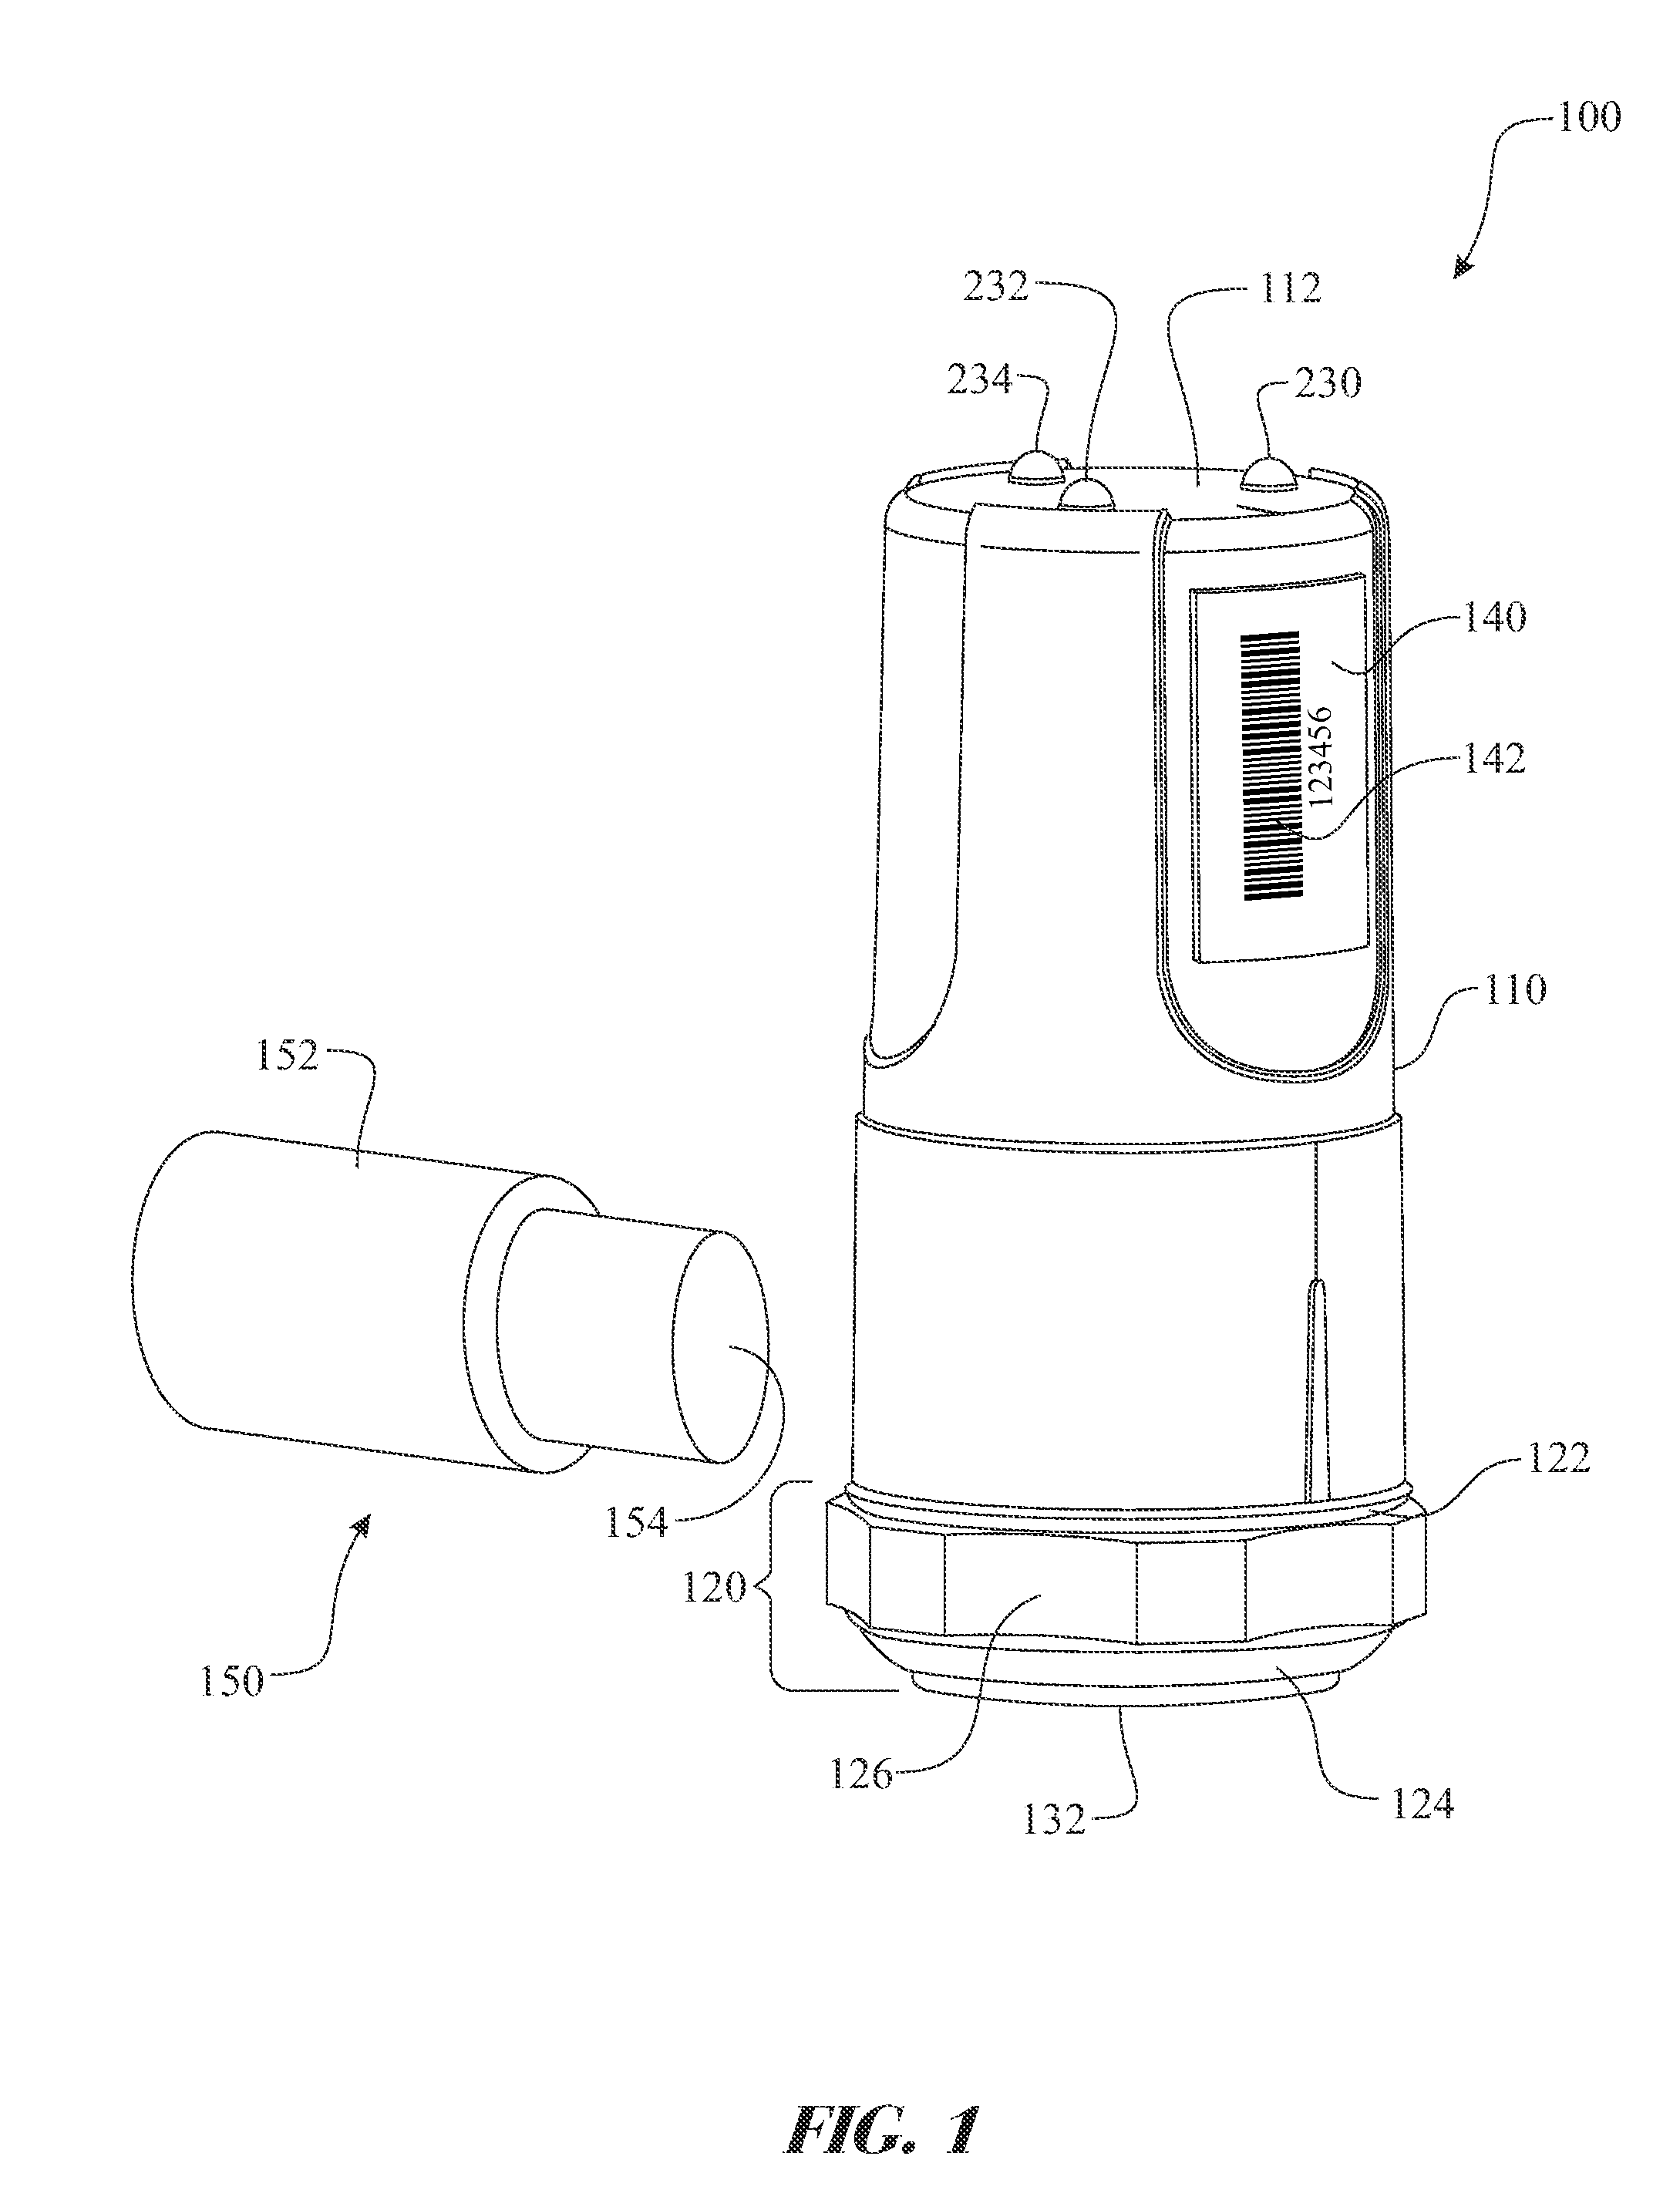 Method of monitoring a health status of a bearing with a warning device in a percentage mode